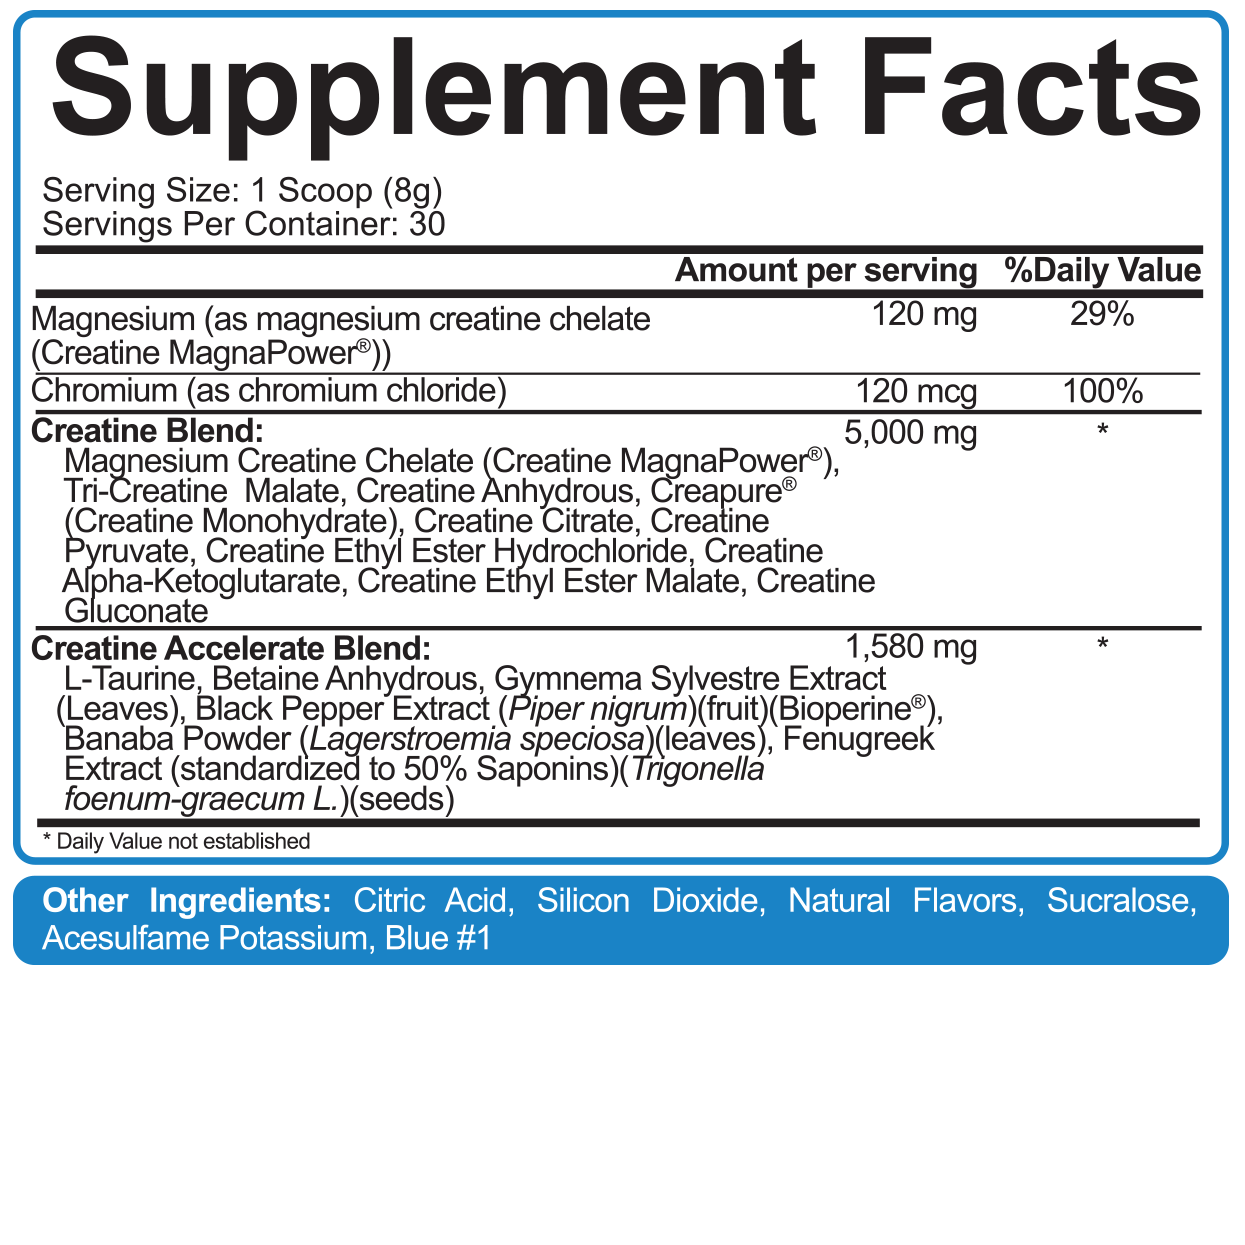 Supplement facts detailing serving size, ingredients, and daily values; includes various types of creatine and other natural ingredients.